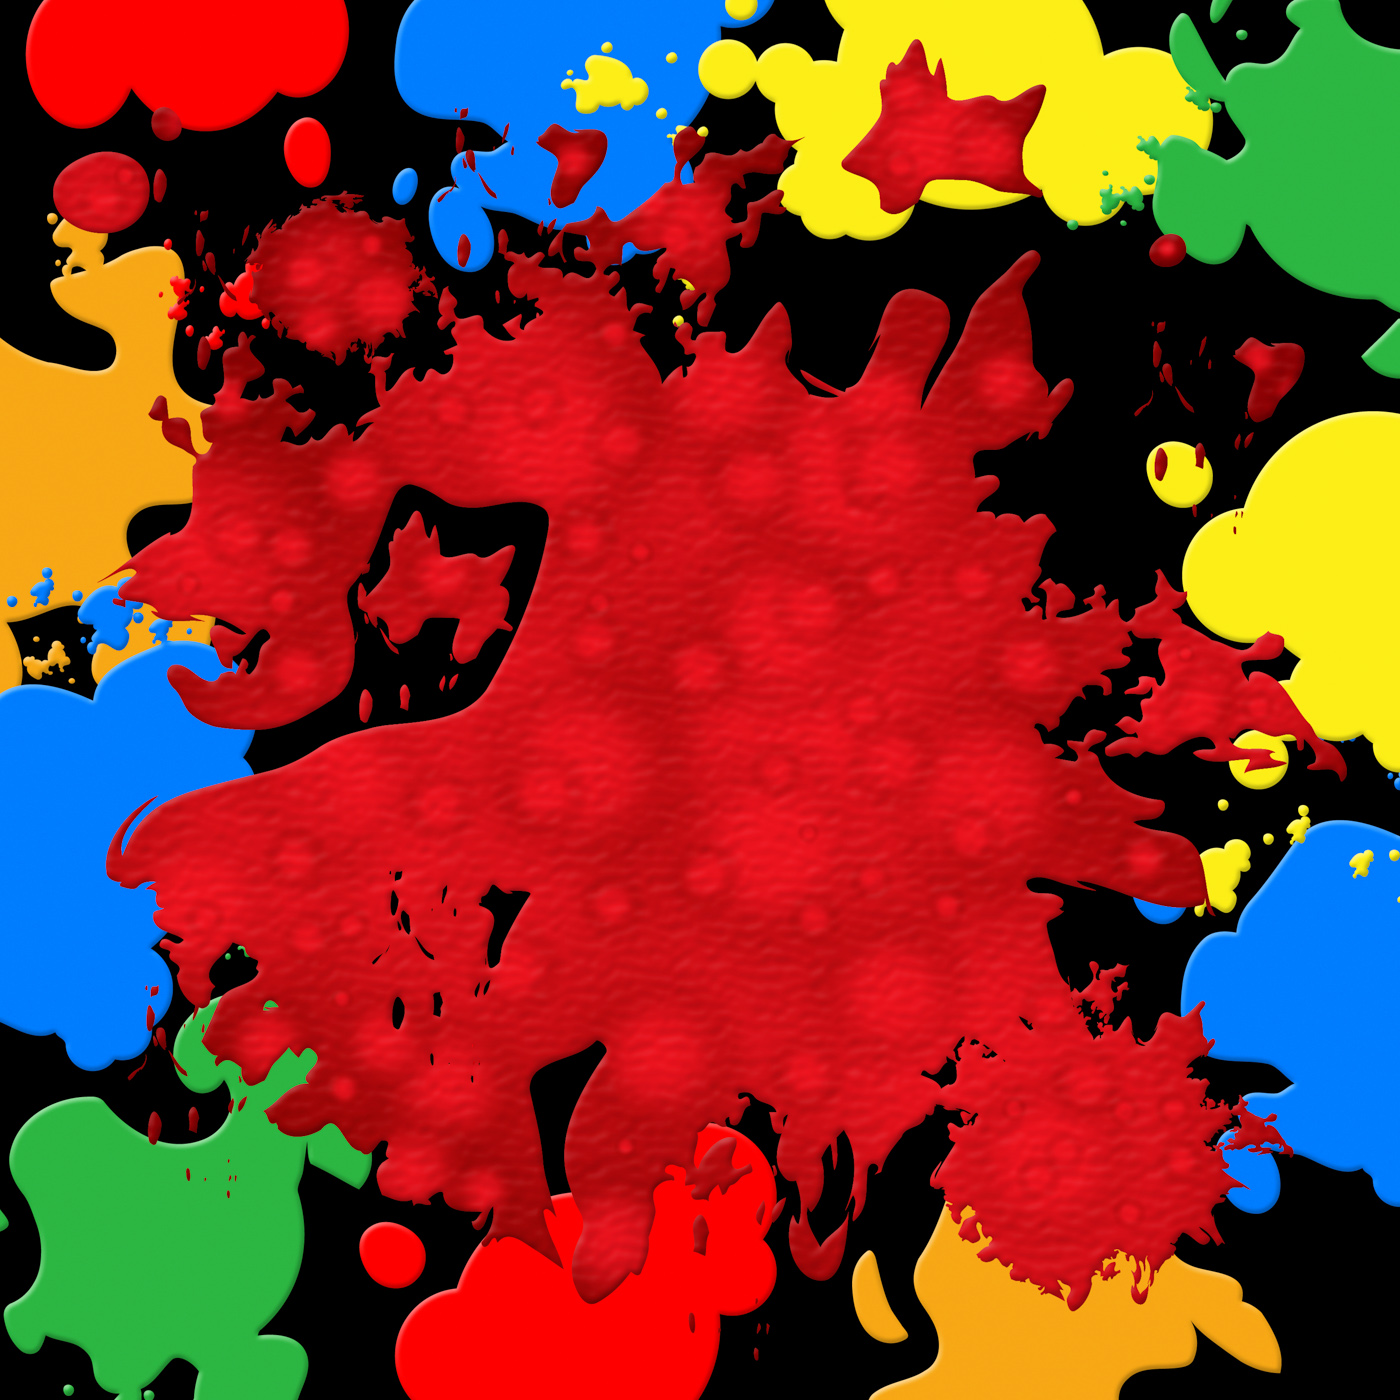 Splash background represents paint colors and spatter photo